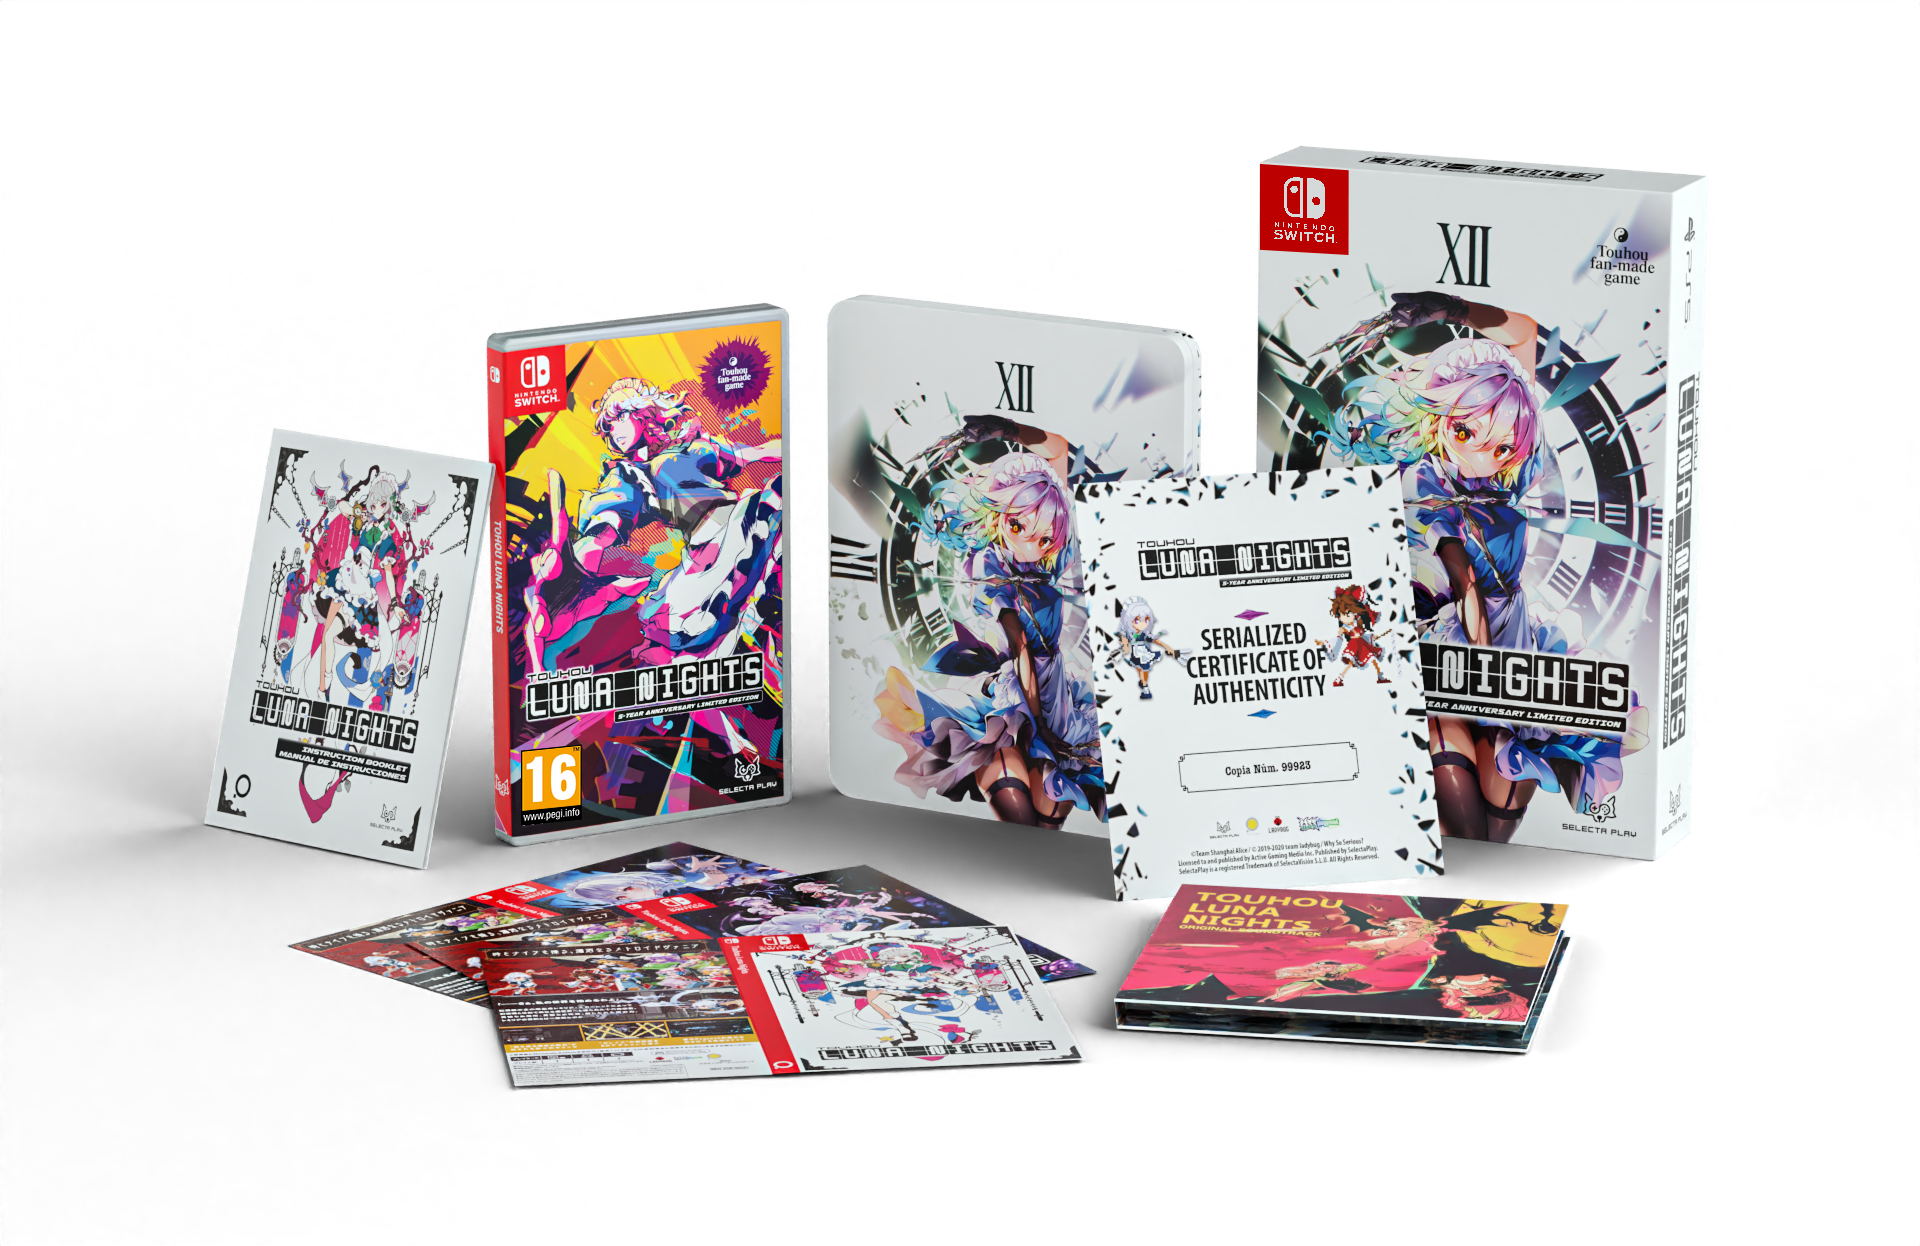 Collectors edition of Touhou Luna Nights for Switch